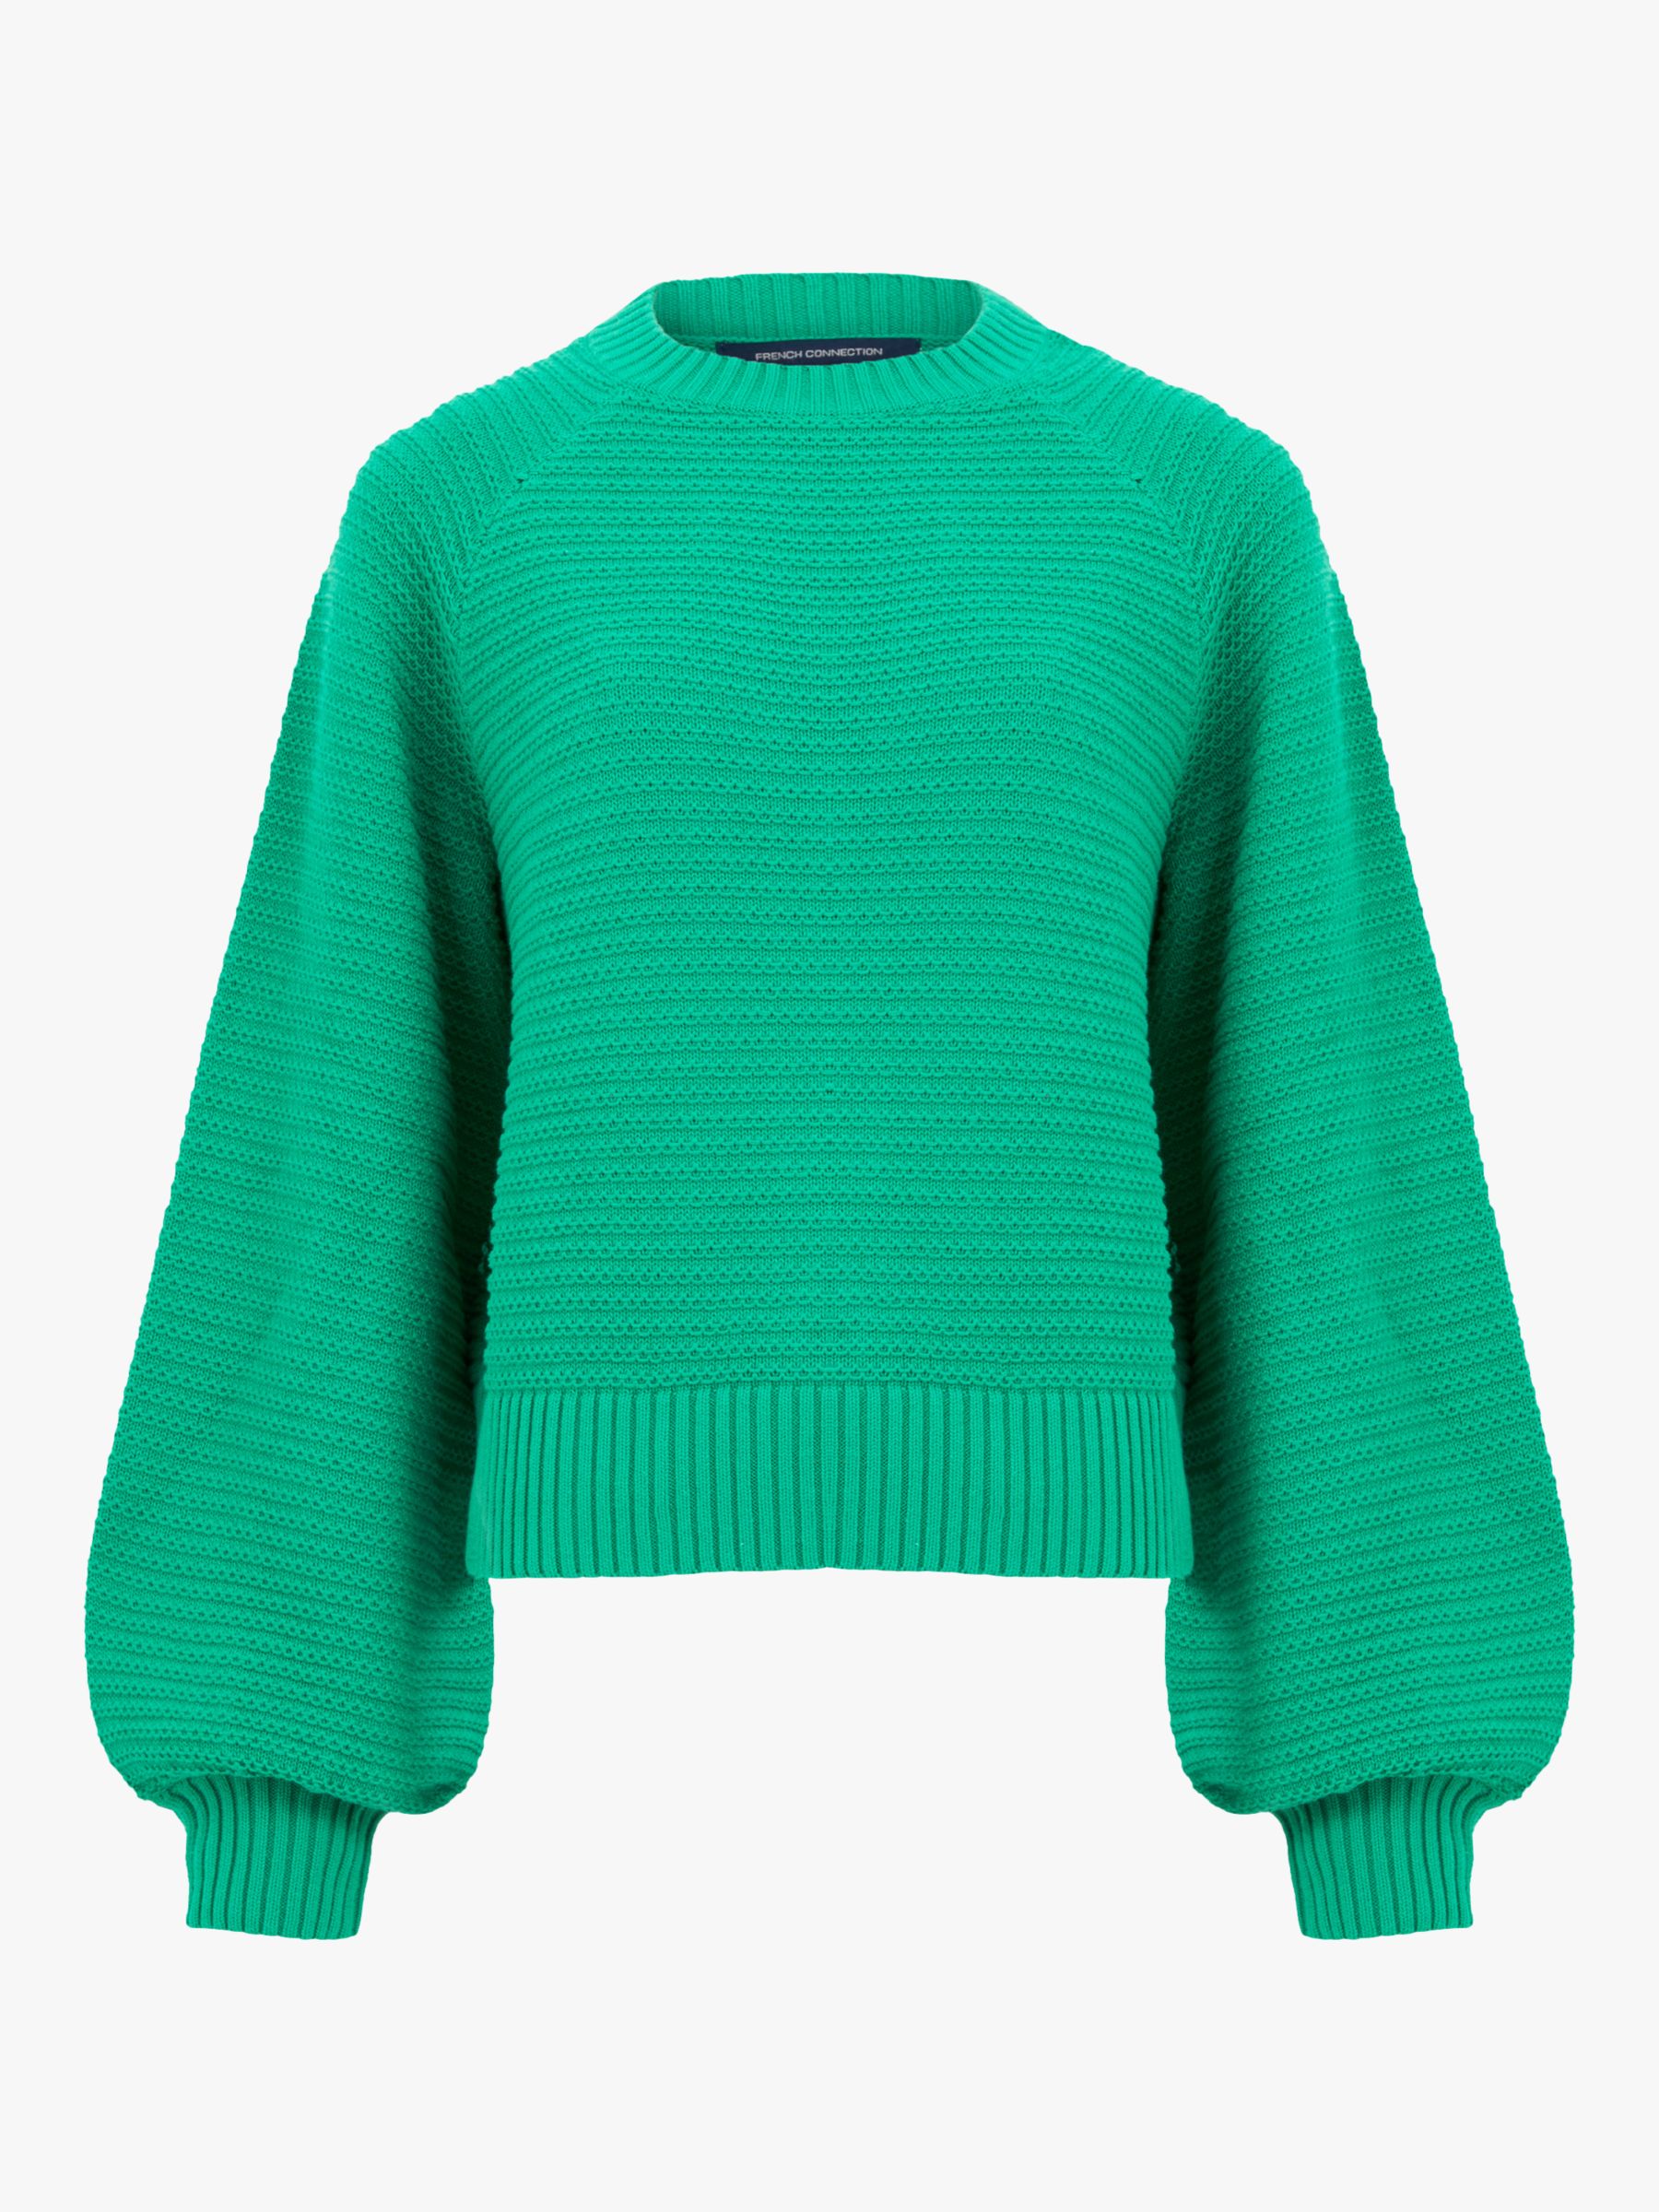 French Connection Lily Mozart Cotton Jumper, Jelly Bean, XS